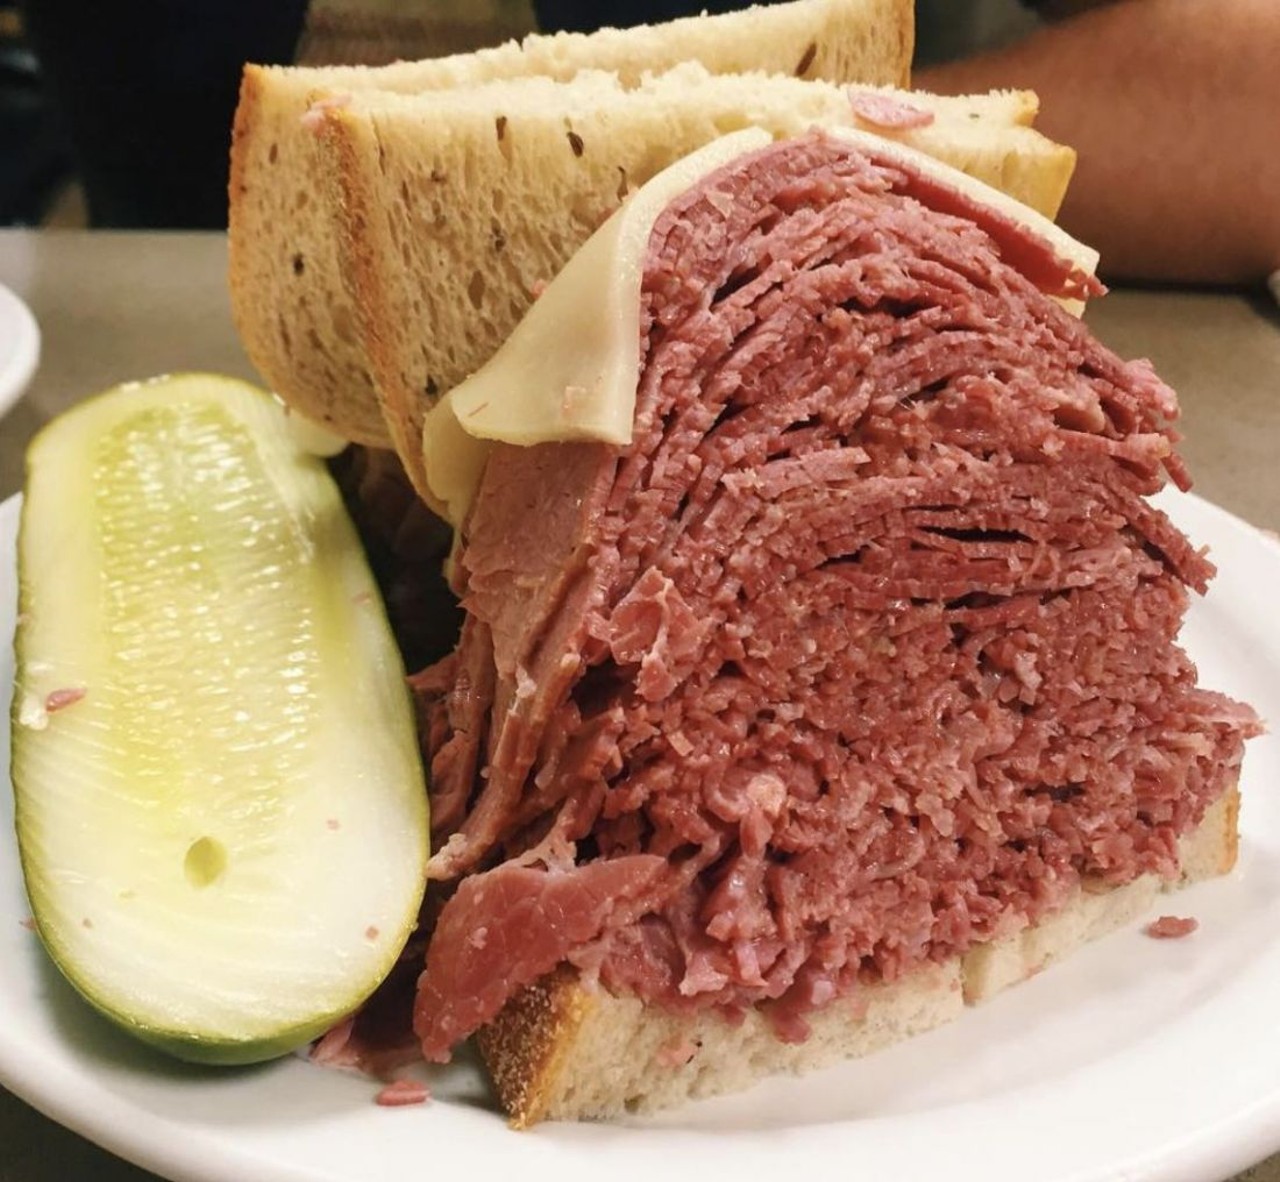 Corned Beef on Rye
What: The sandwich stacked high on rye with mustard
Why: Nothing fuels a debate in Cleveland faster than asking which shop serves the best version of this Jewish soul food
Photo via Scene Archives